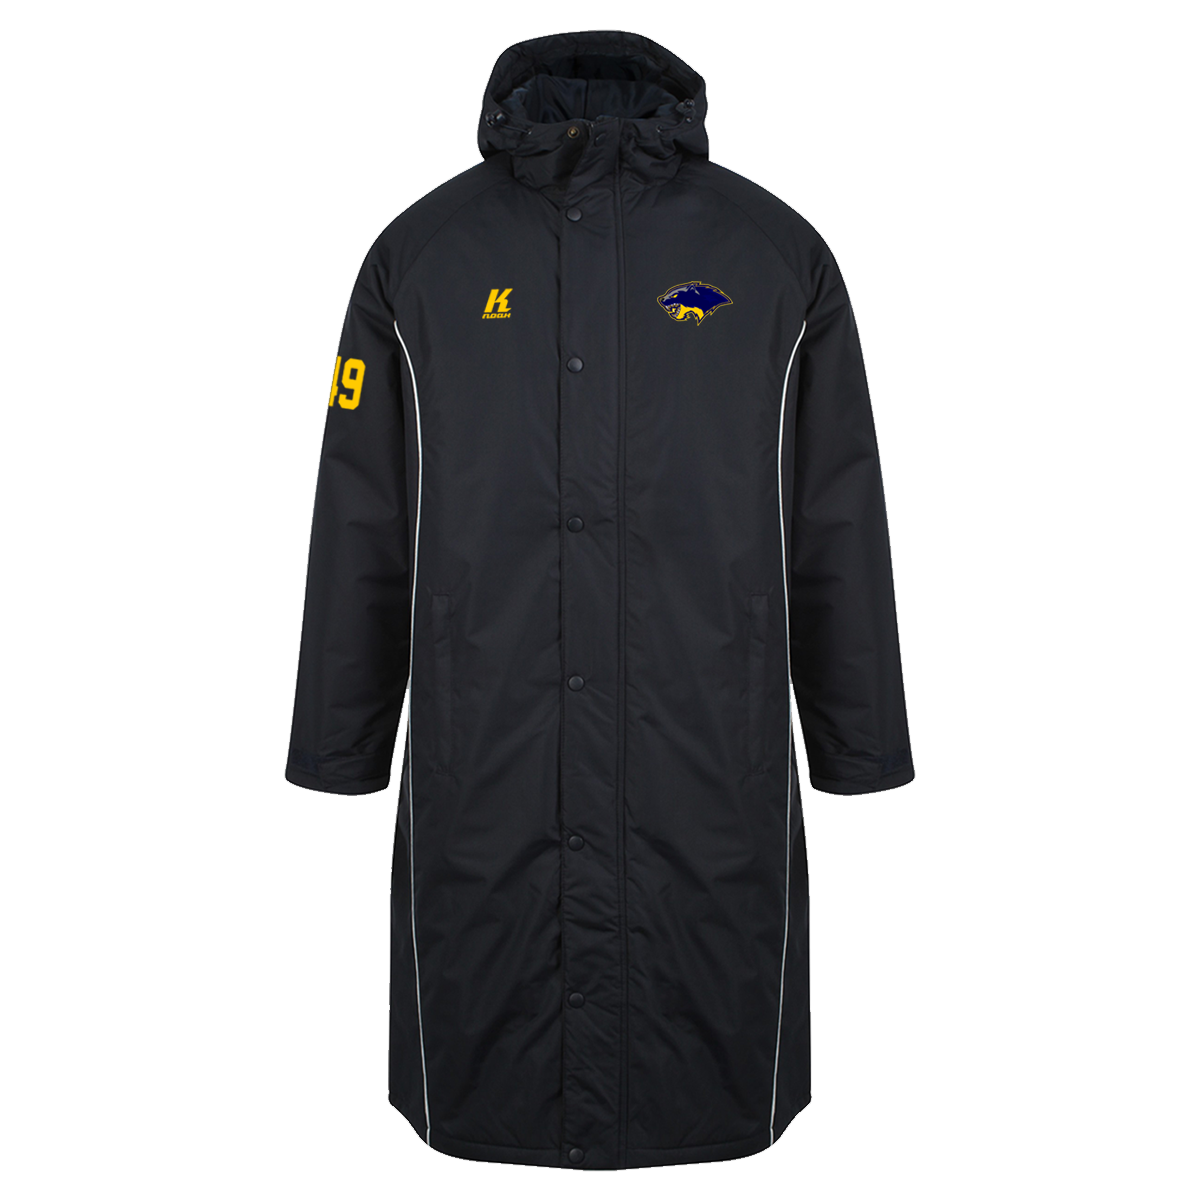 Wolverines Sideline Sub Coat with Playernumber/Initials